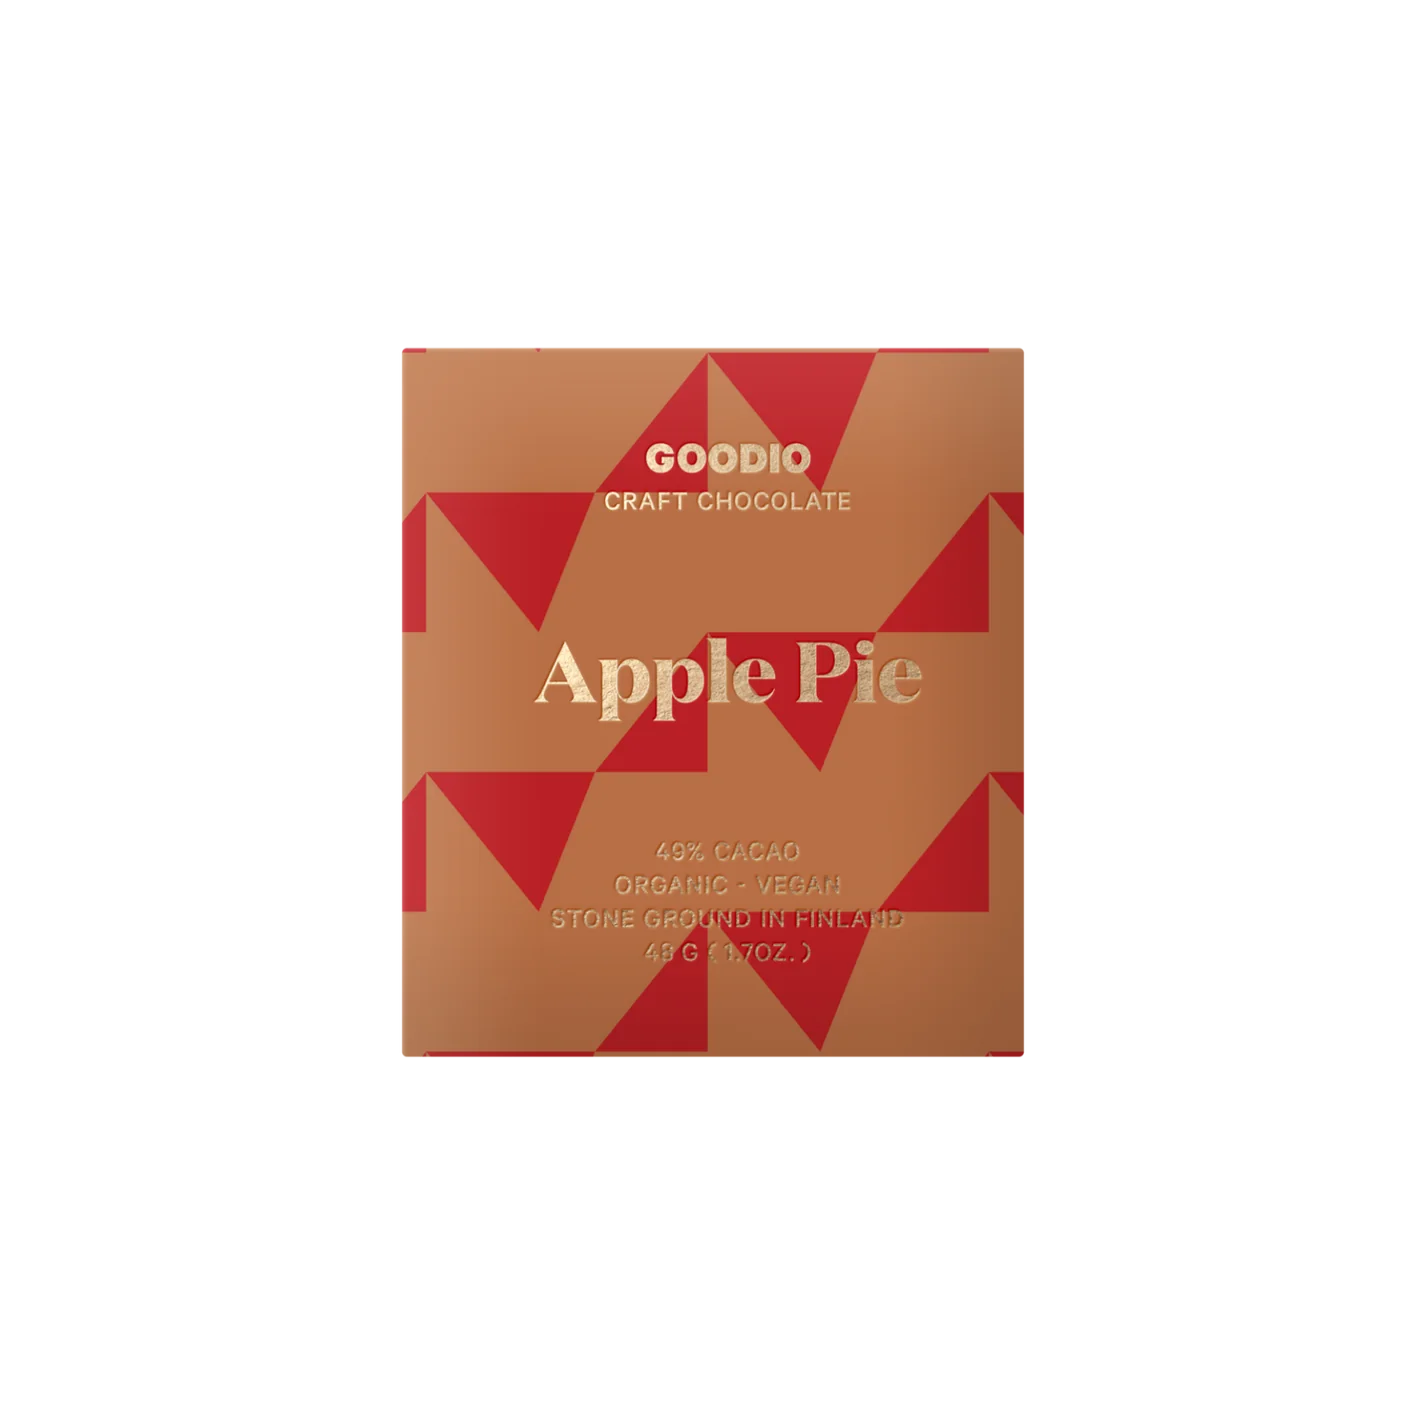 Goodio Apple Pie Chocolate packaging (front)